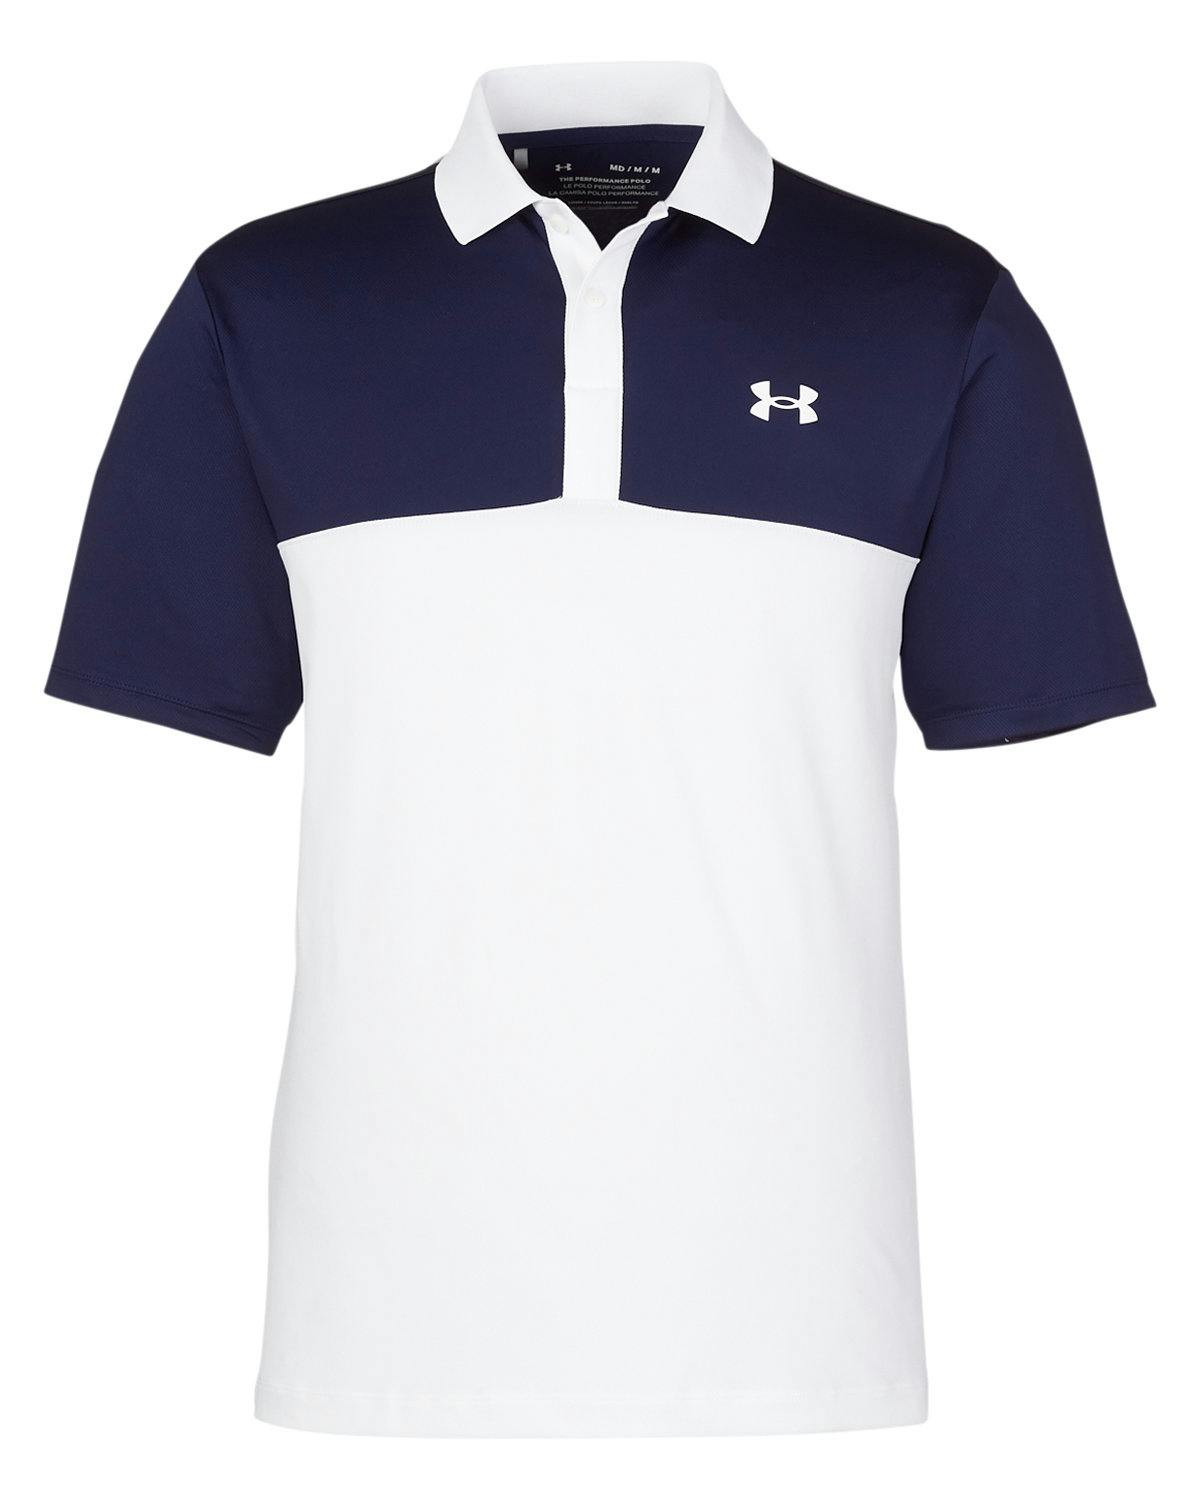 Image for Men's Performance 3.0 Colorblock Polo